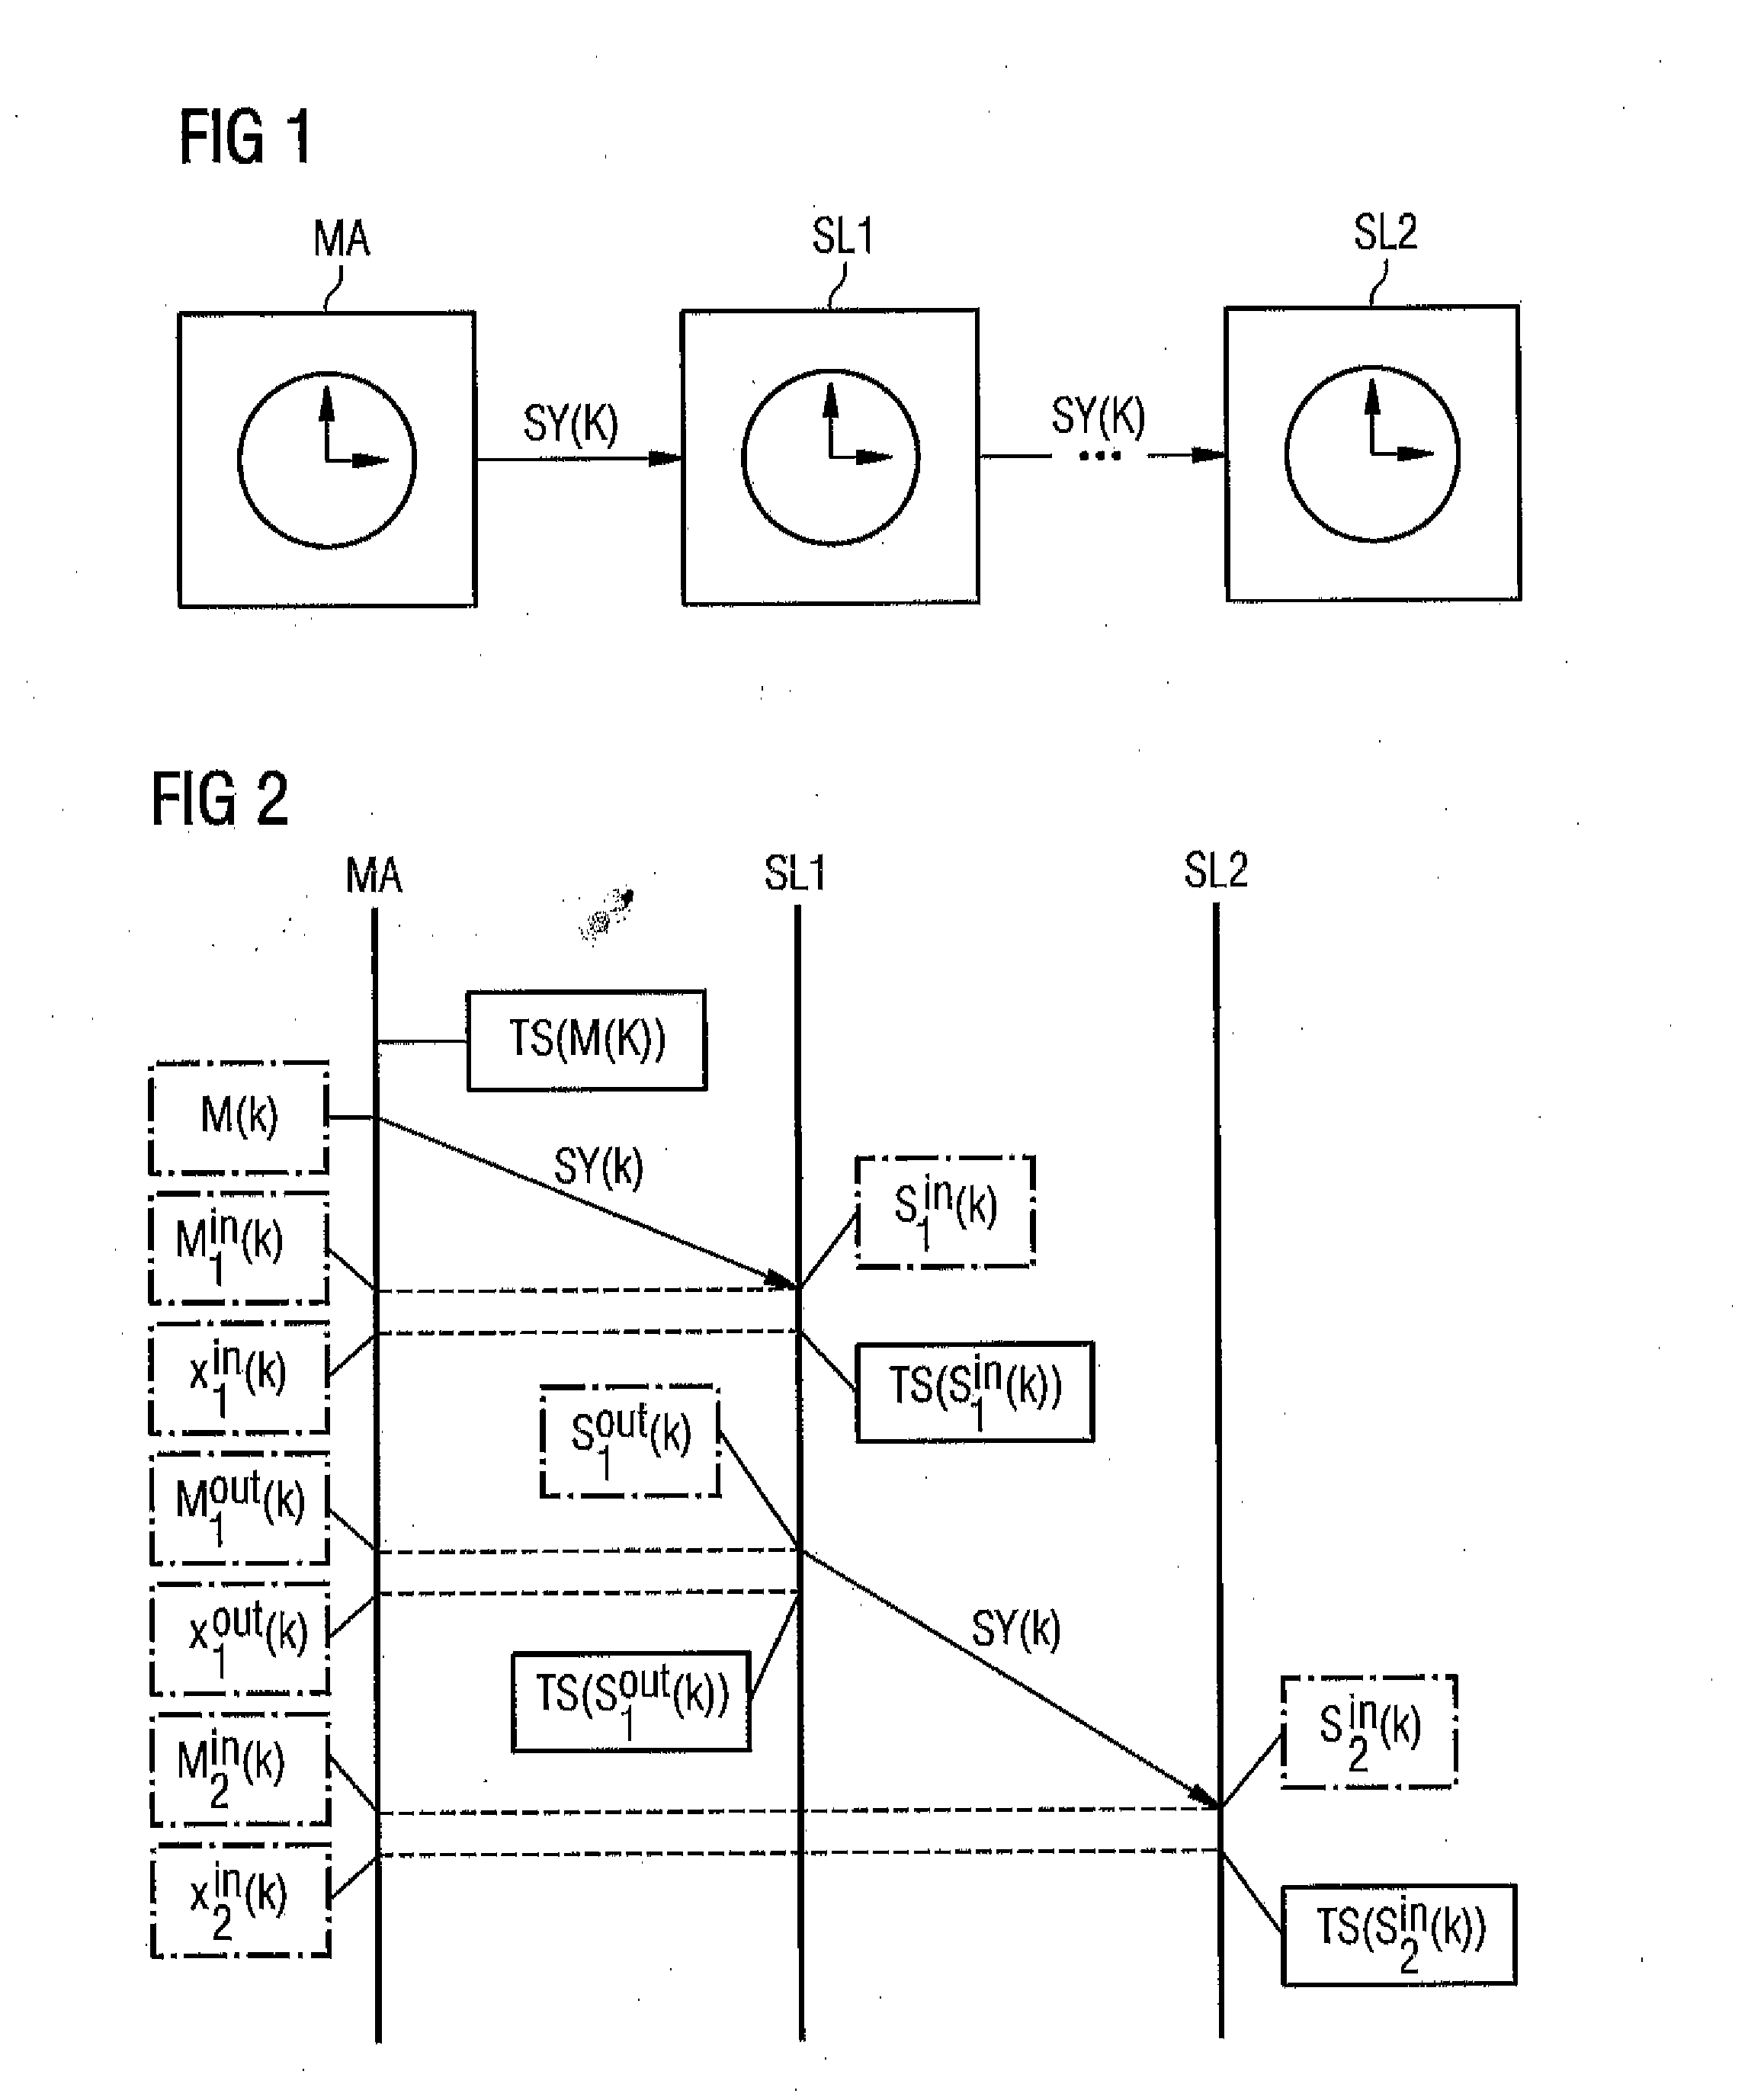 Method for Time Synchronization in a Communication Network